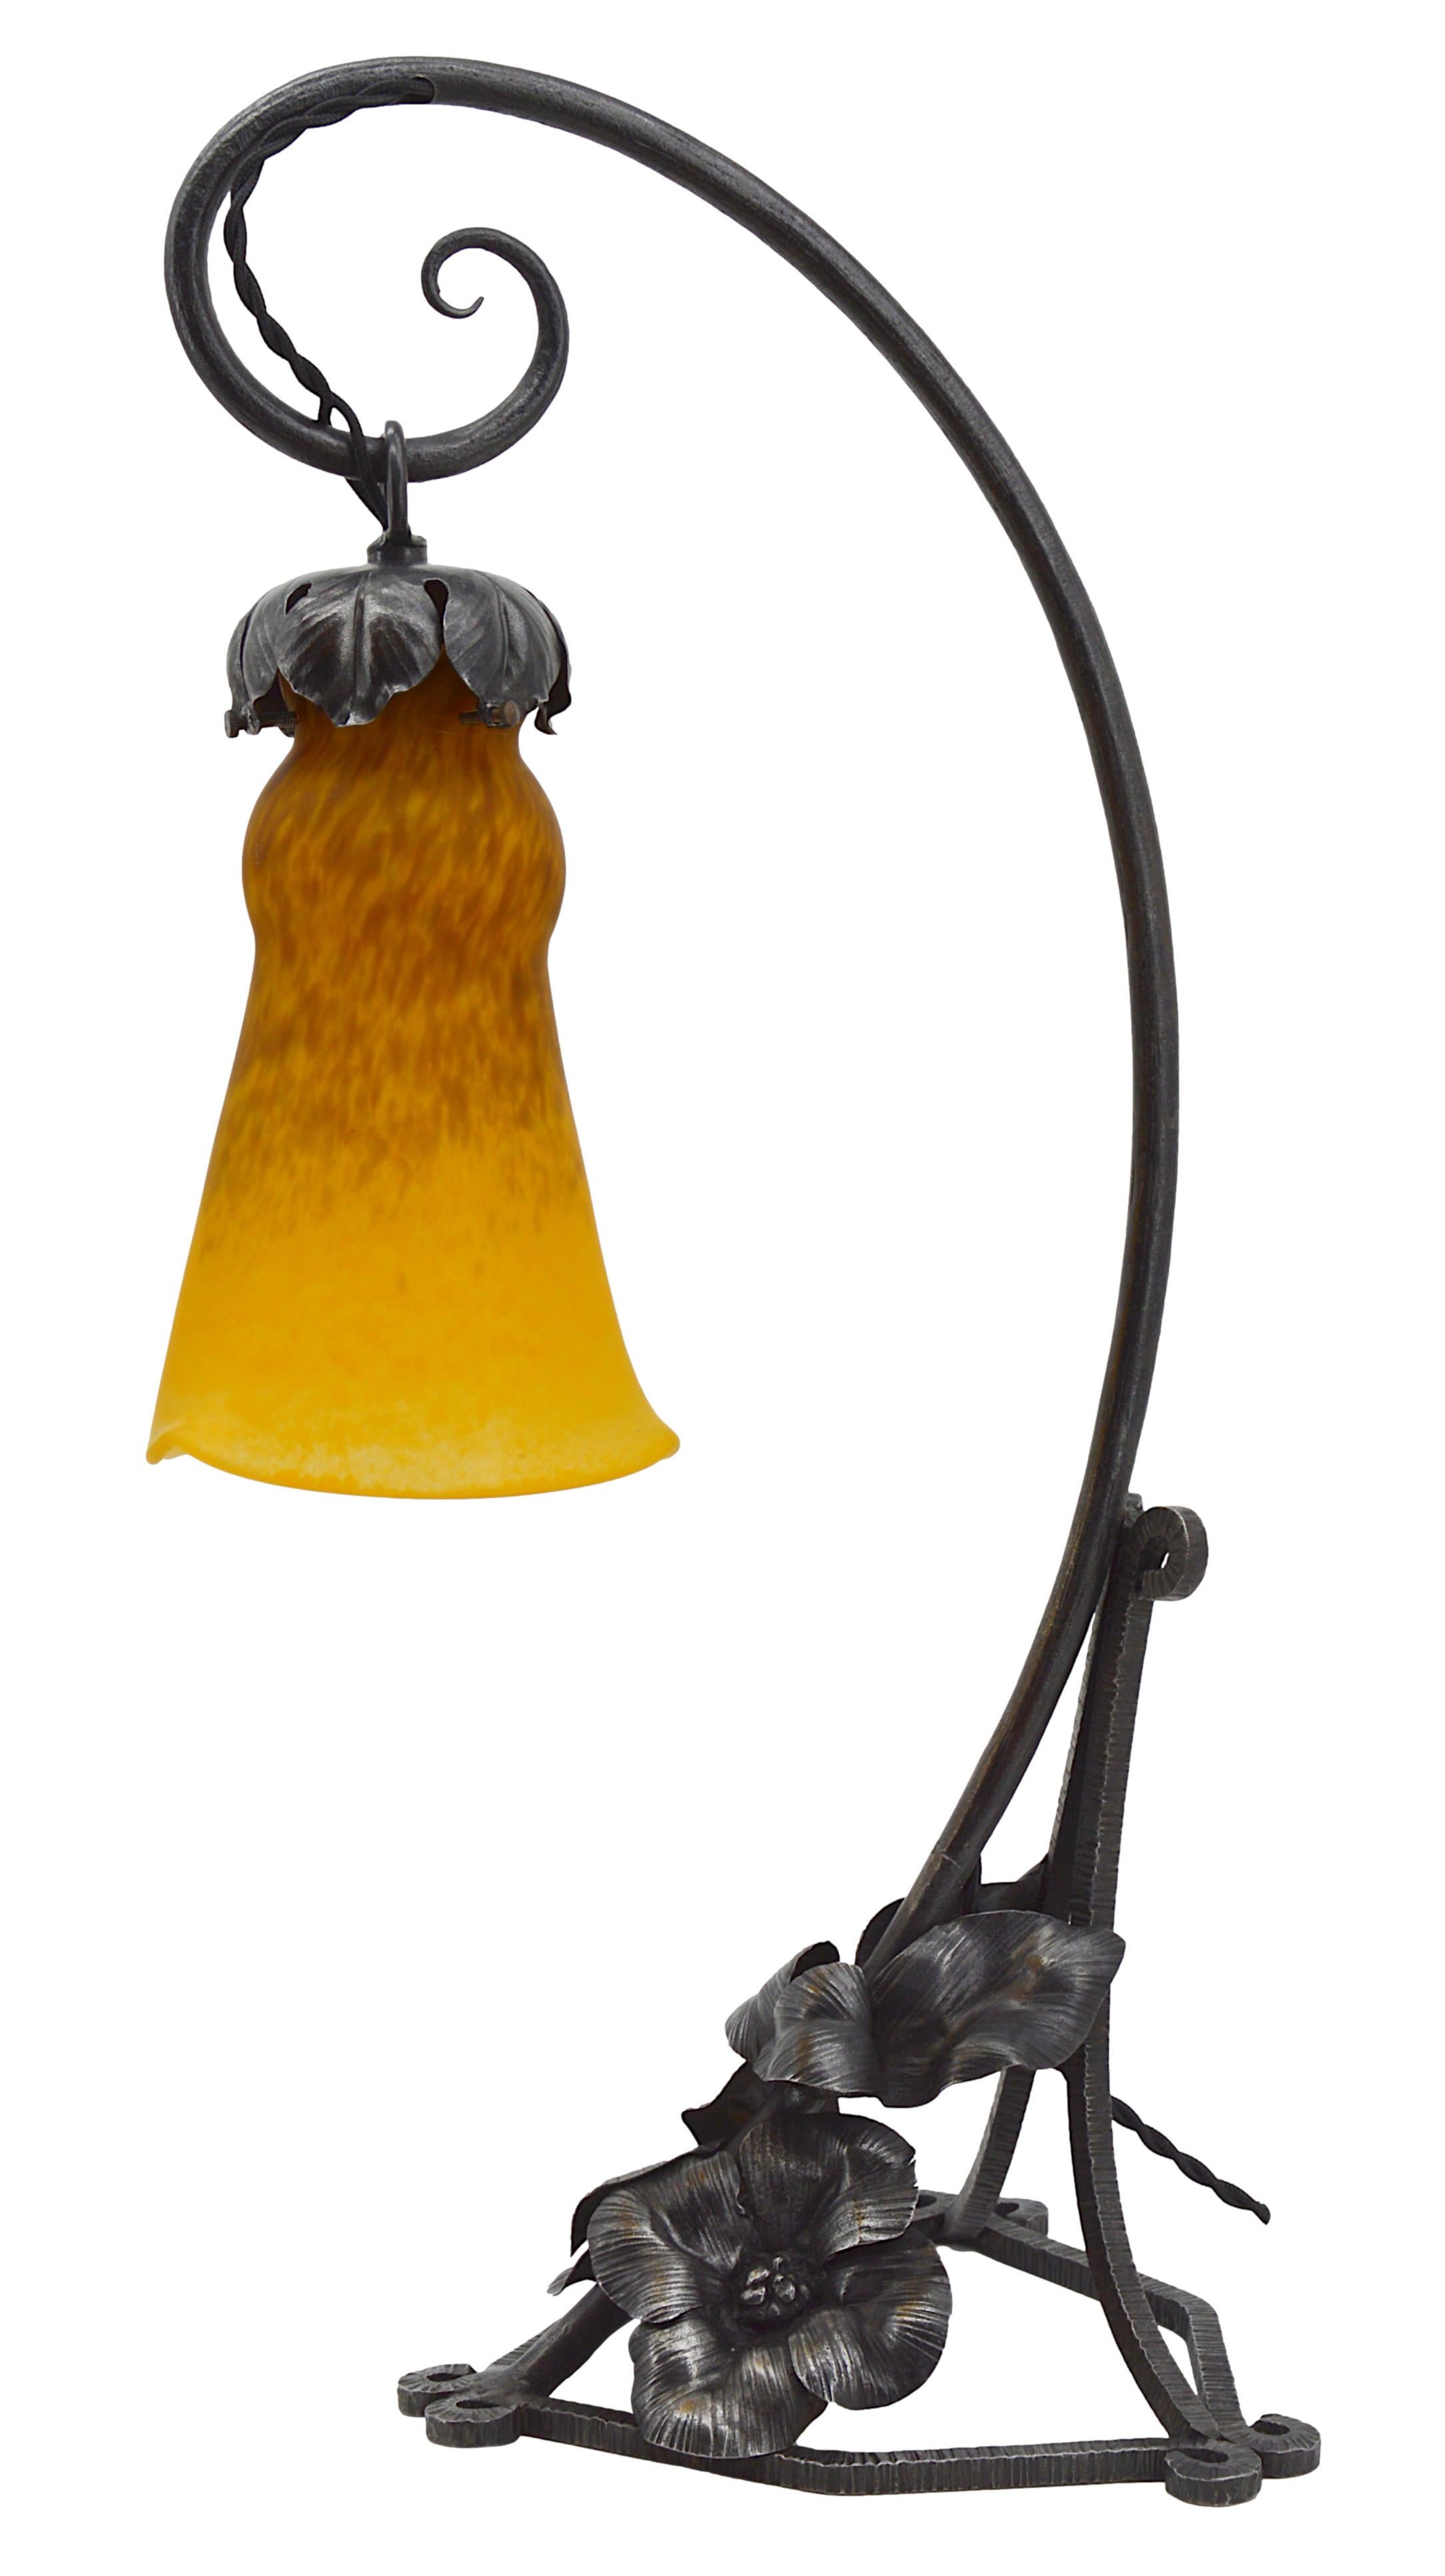 Glass Andre Delatte Large French Art Deco Table Lamp, Late 1920s For Sale